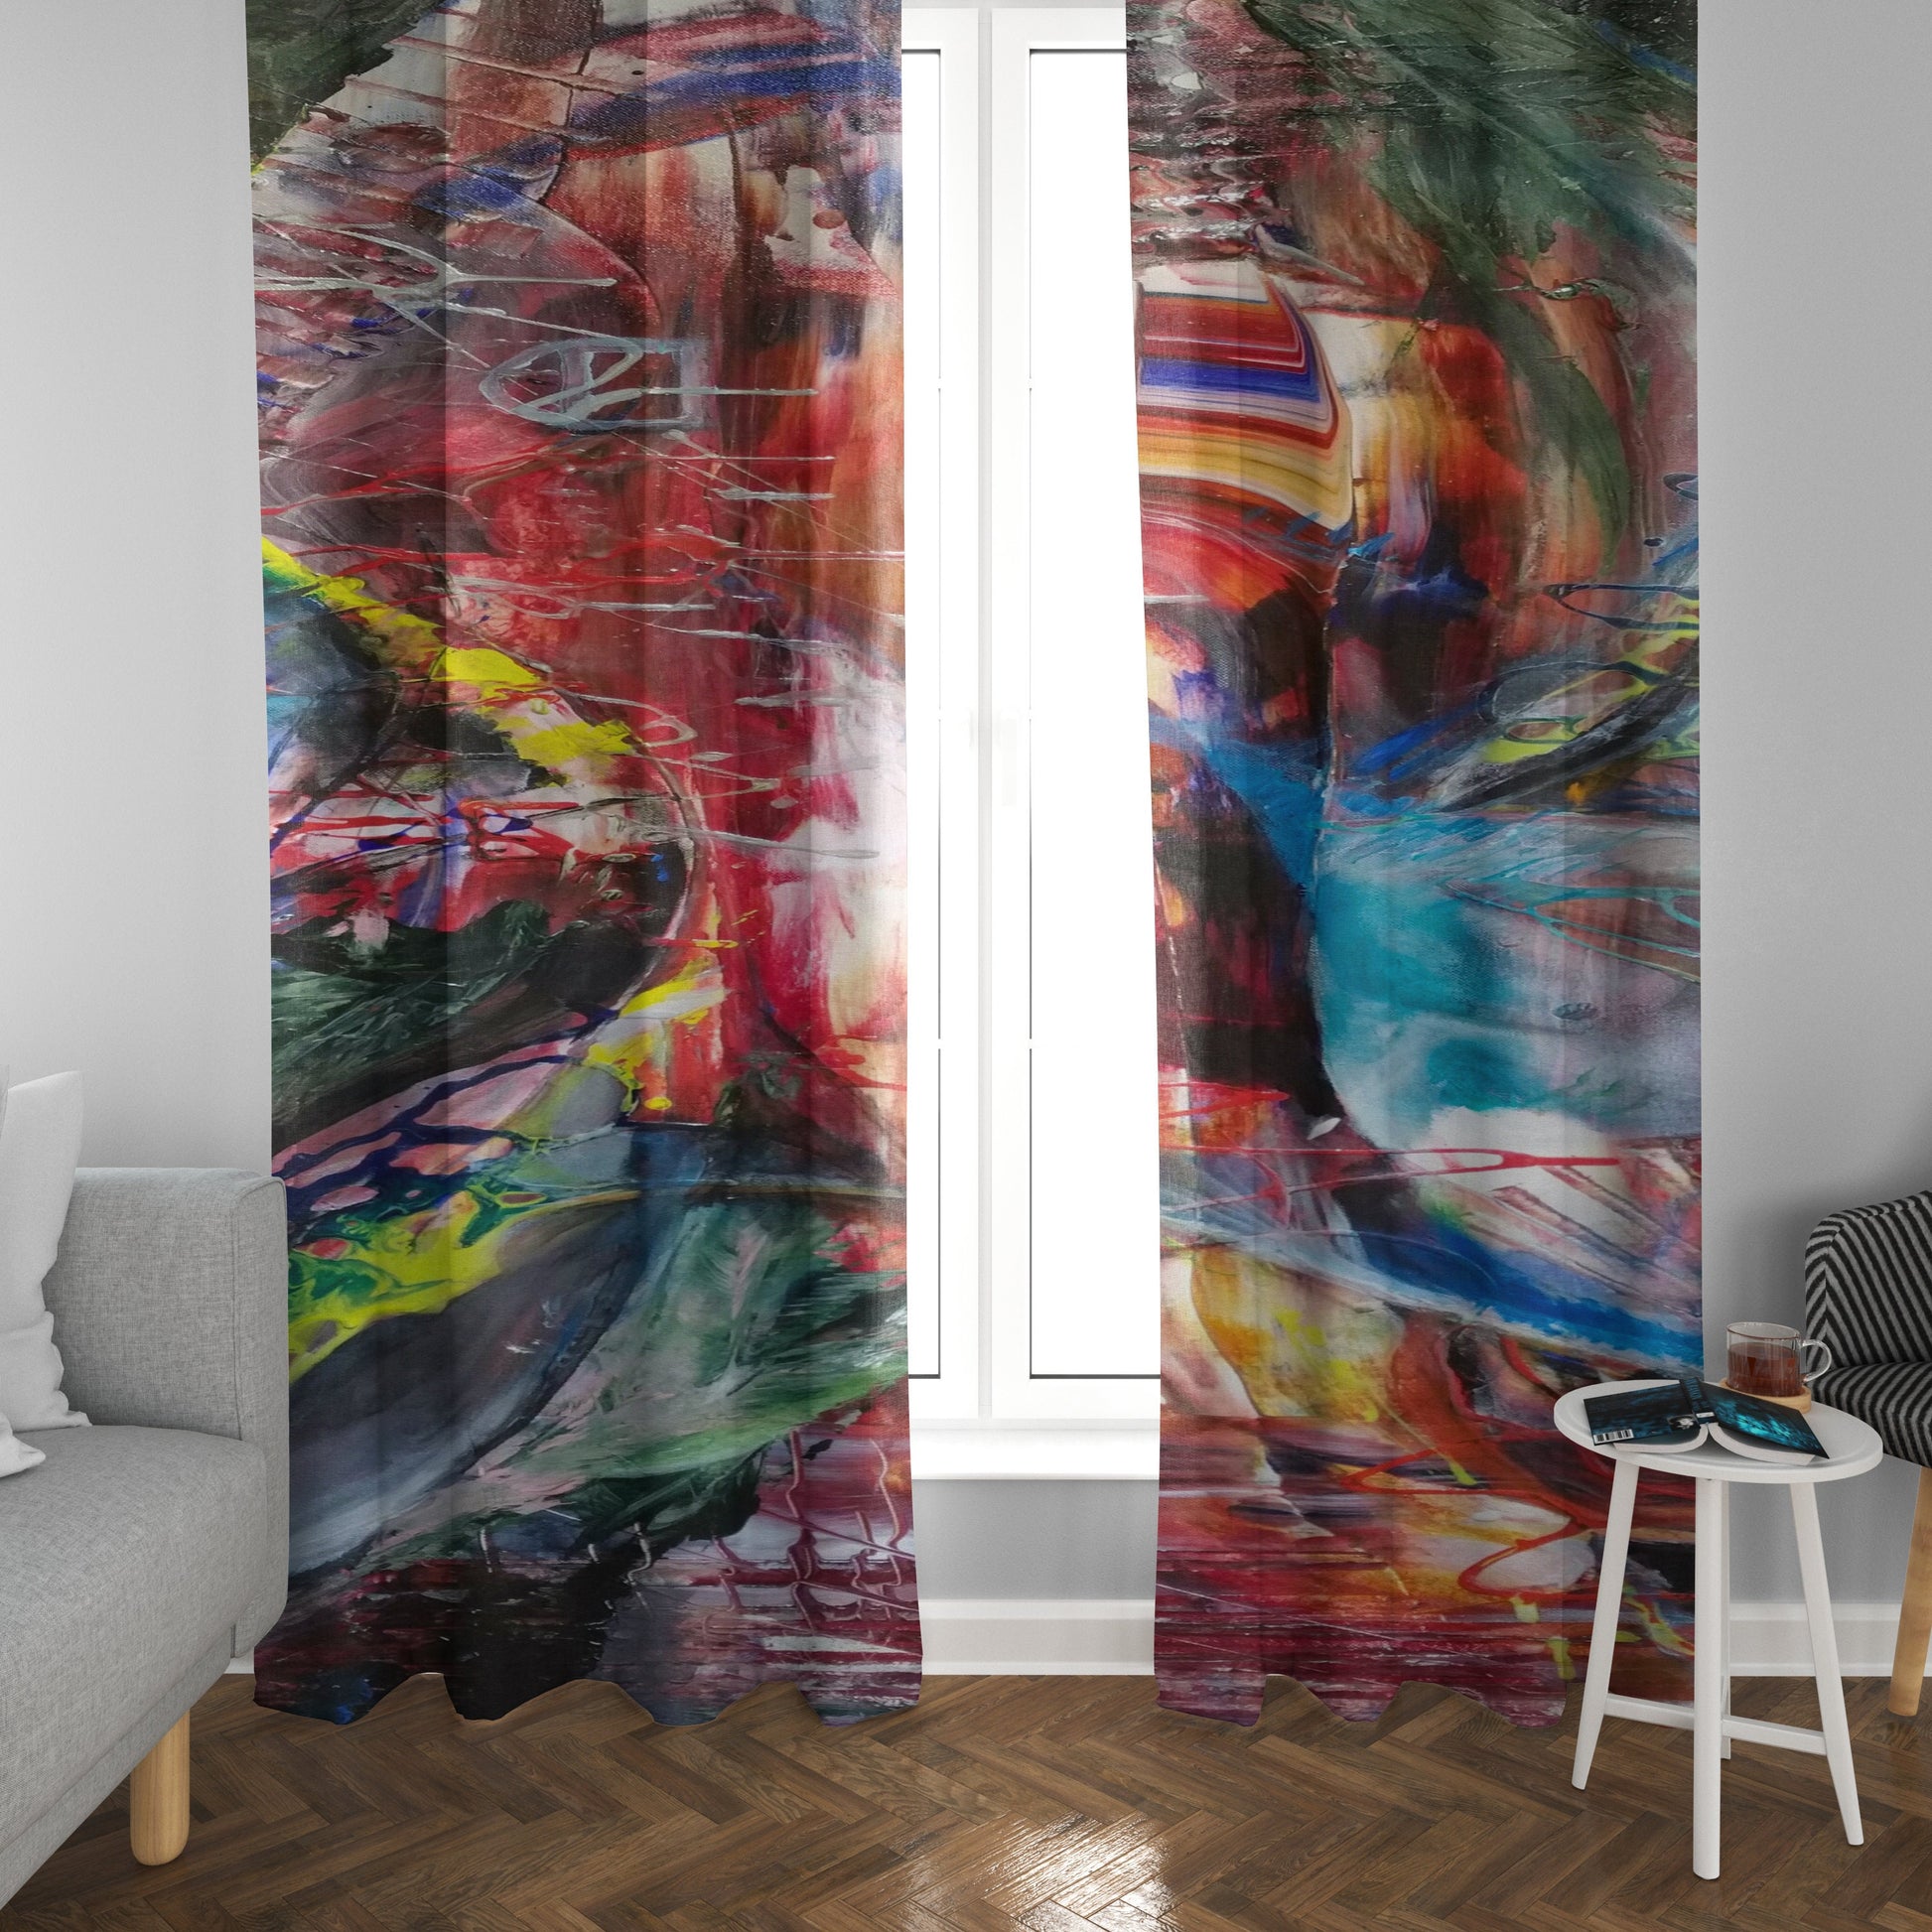 Abstract Art Window Curtain psychedelic Drapery Curtain Panels psychedelic window treatment artwork colorful unique gifts for him red blue